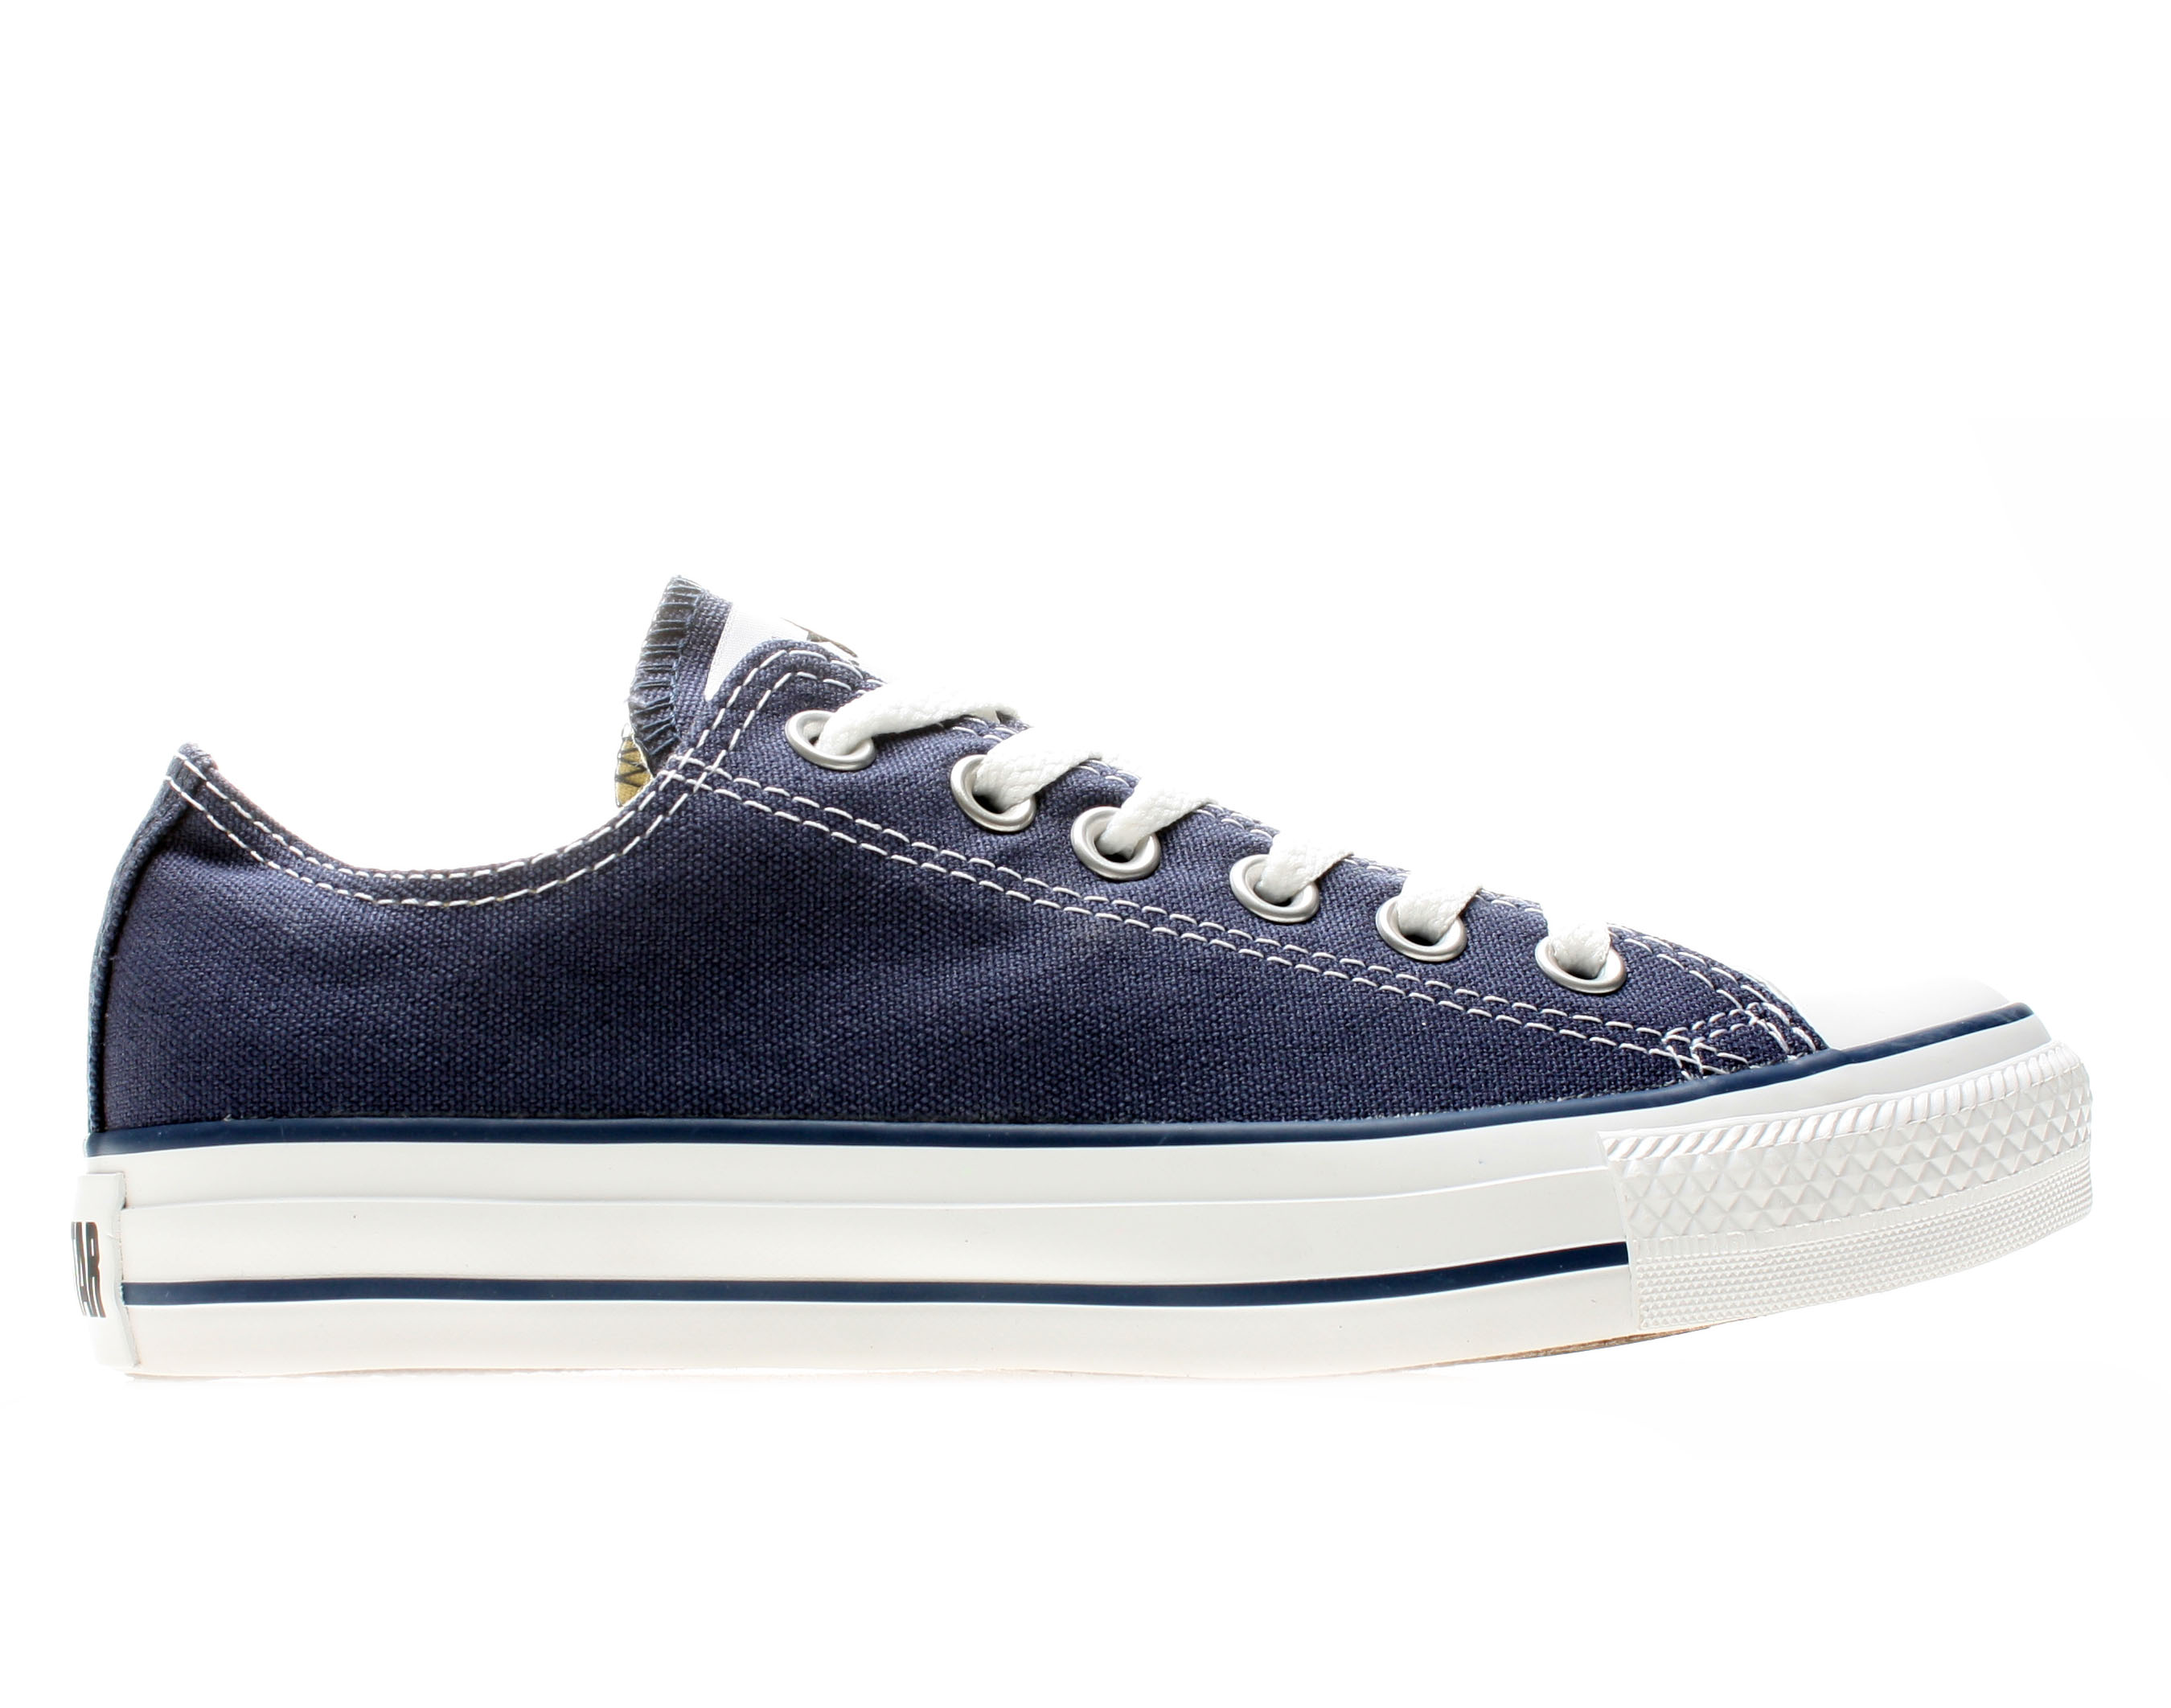 Converse Chuck Taylor All Star Low Sneaker - image 2 of 6